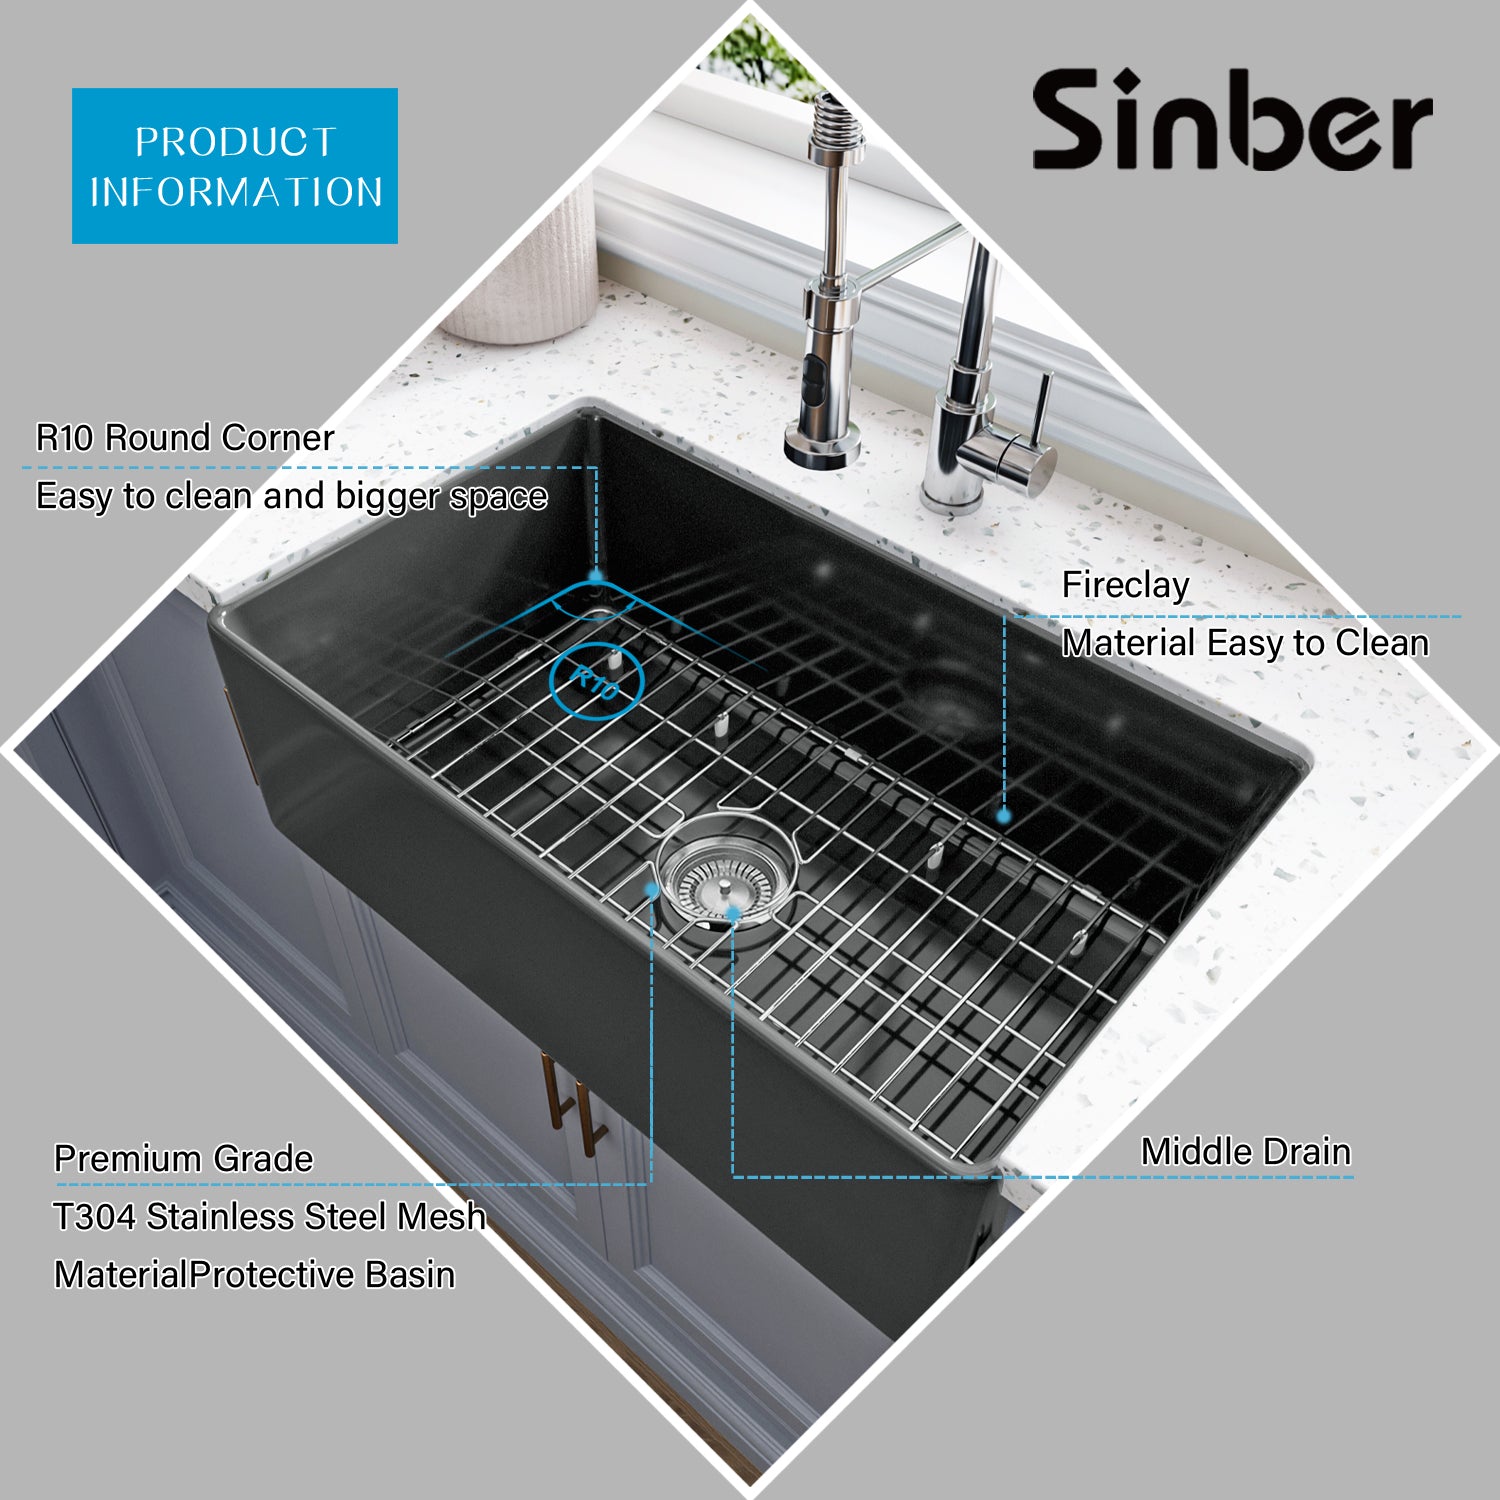 Sinber 30 Inch Farmhouse Apron Single Bowl Kitchen Sink with Fireclay Black Finish 2 Accessories F3018S-B-OL